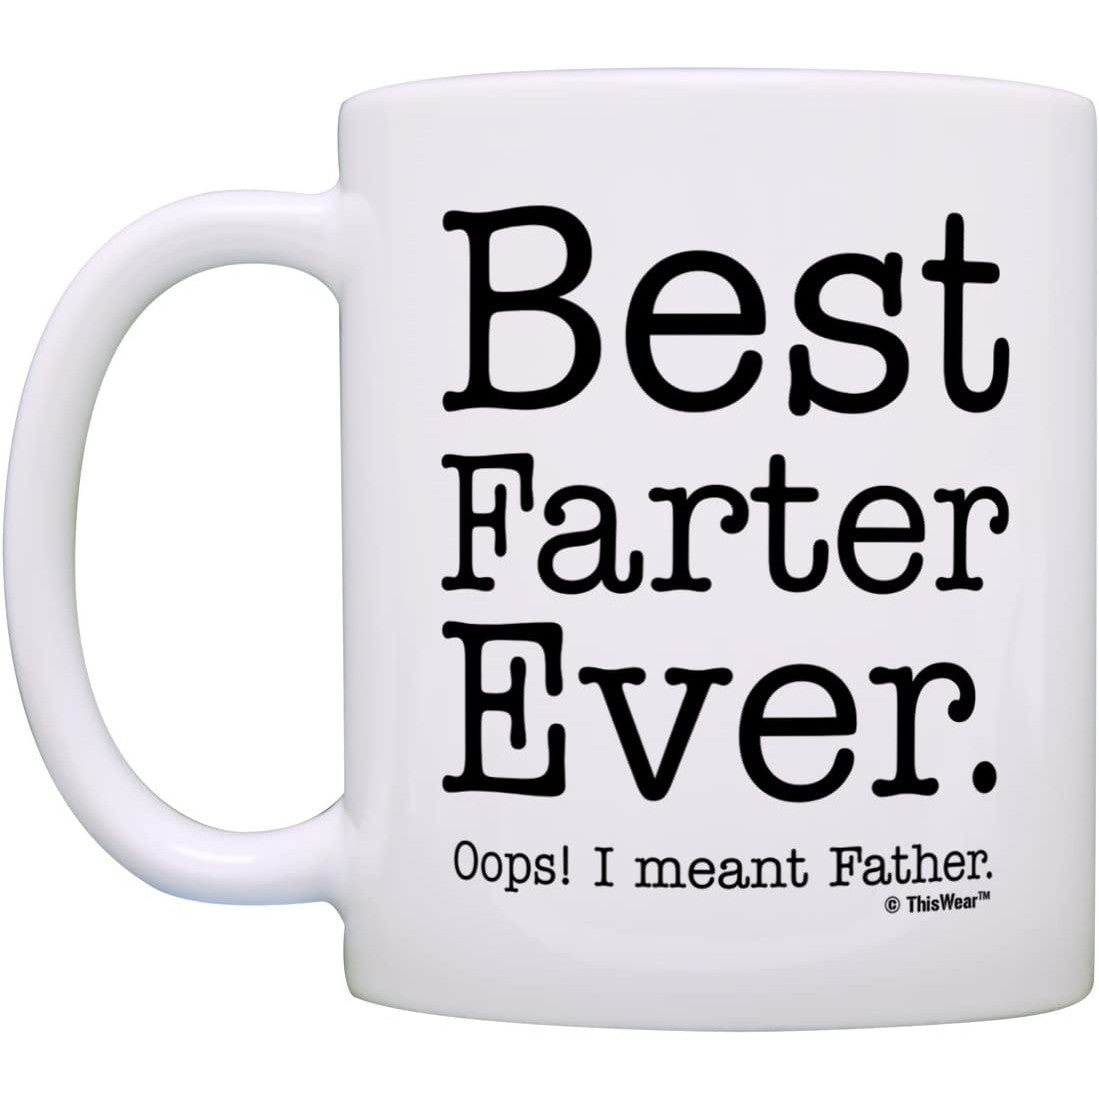 A funny coffee mug which has words printed on it that say, 'Best Farter Ever. Oops! I meant Father.'